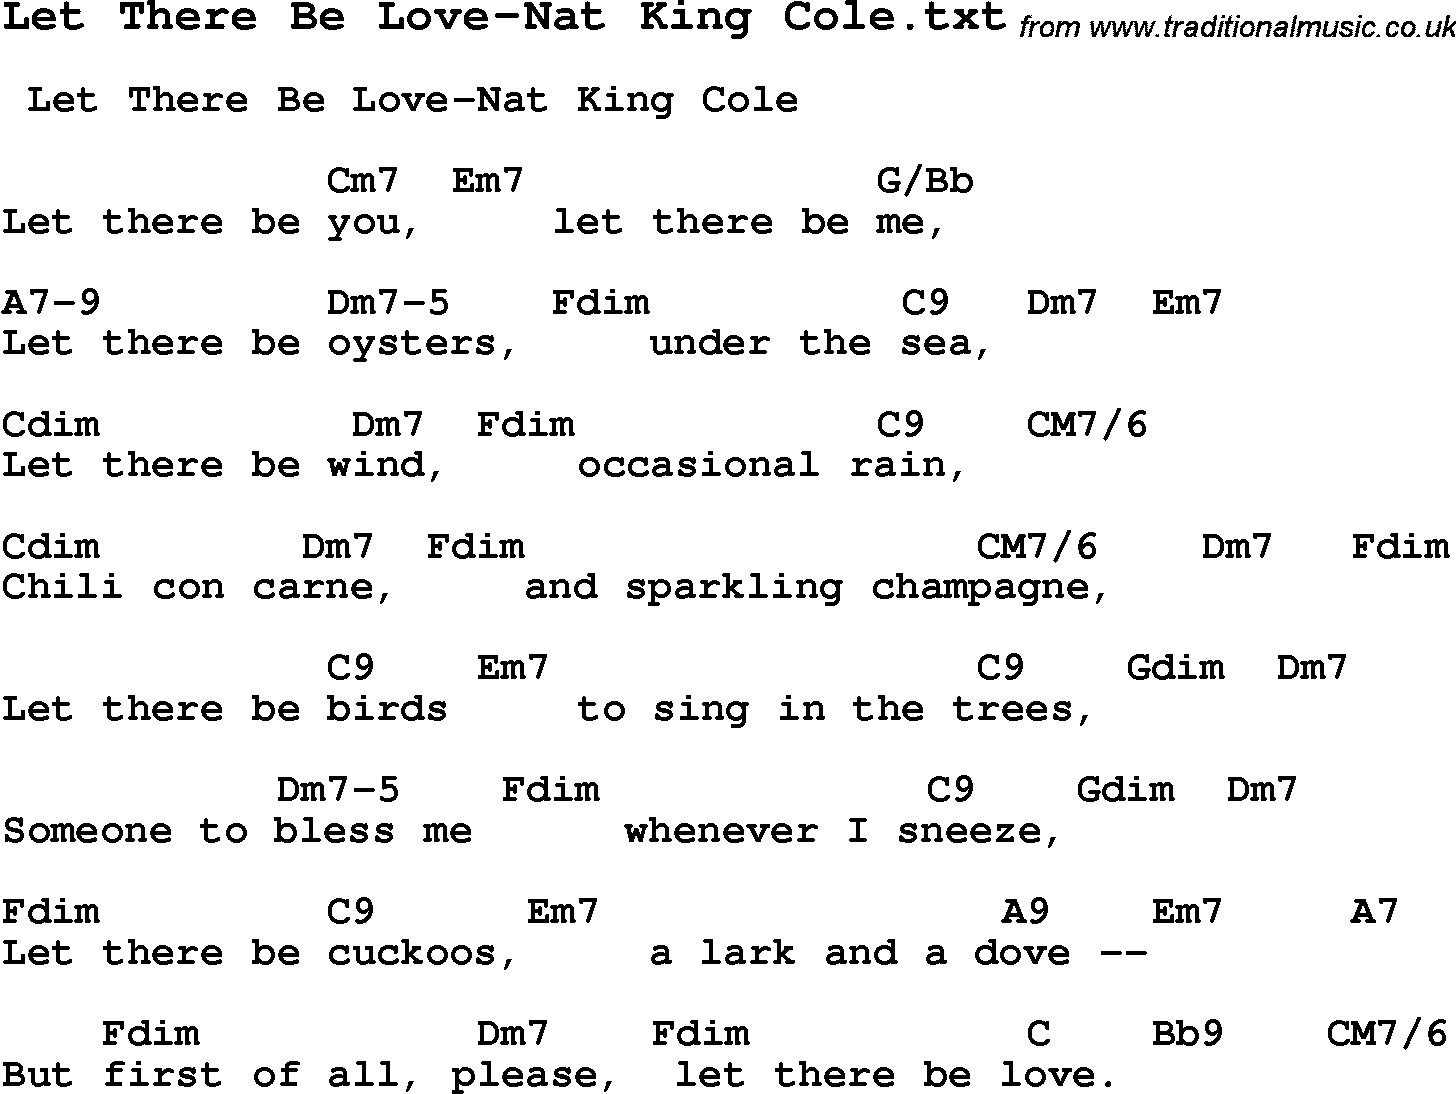 Let There Be Love Oasis song - Wikipedia